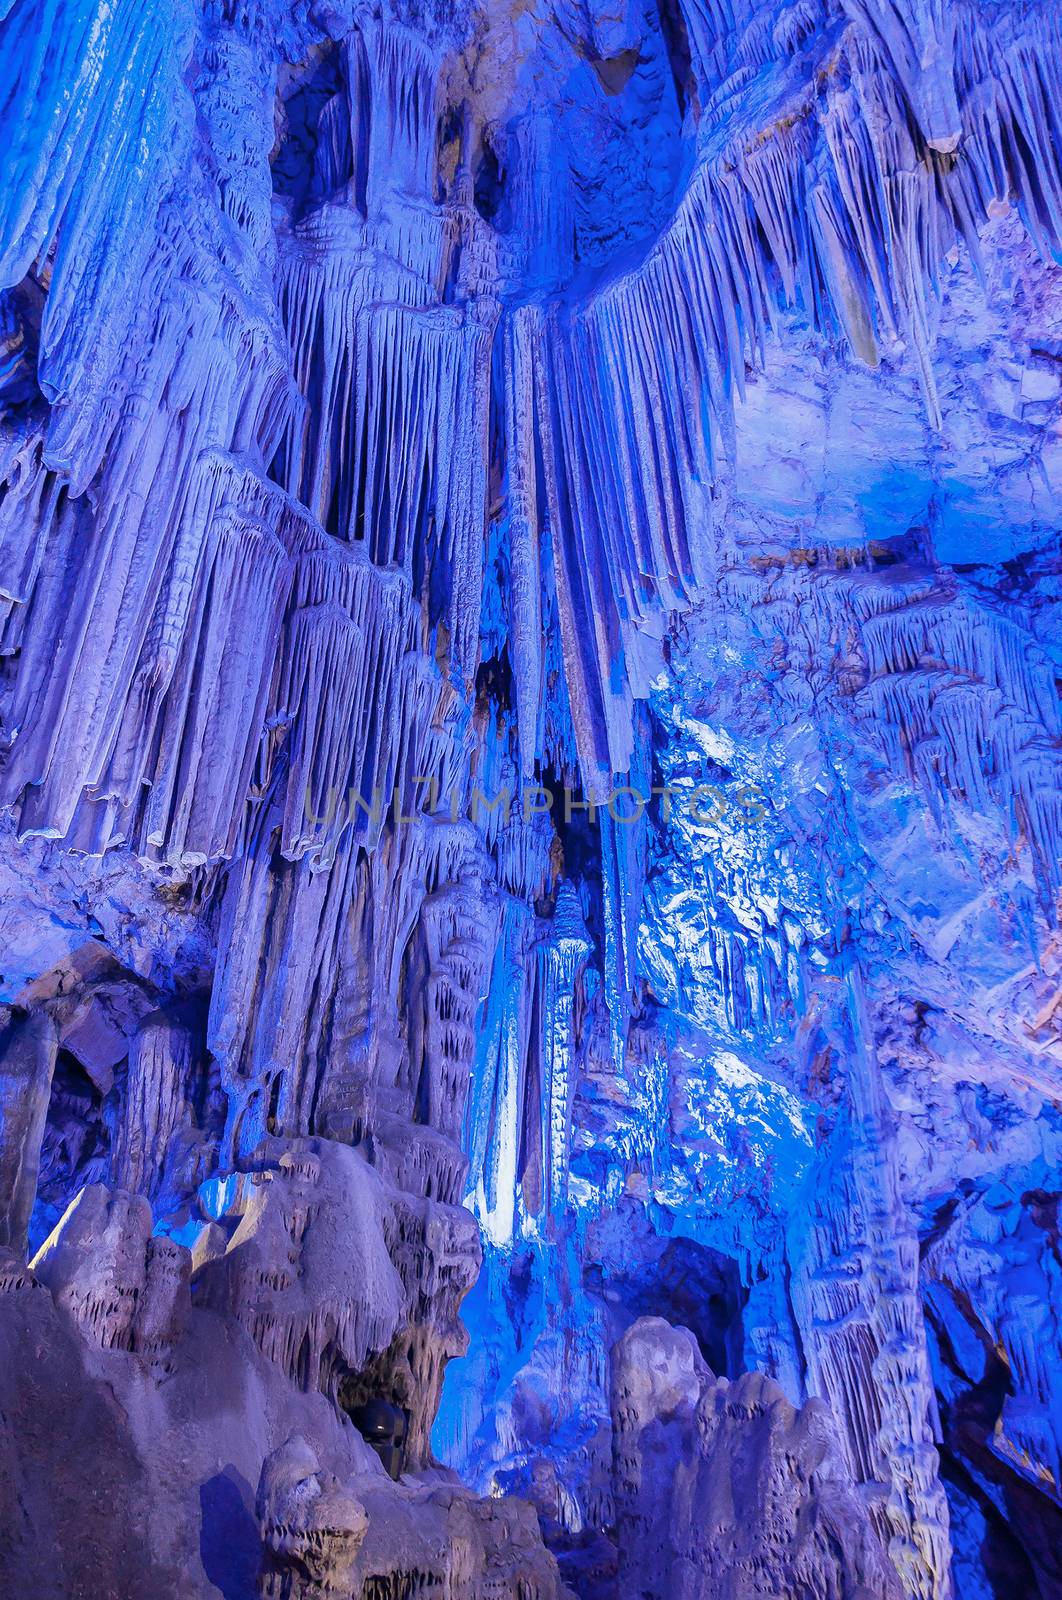 Stalactites inside of St. Michaels cave in Gibraltar illuminated in blue